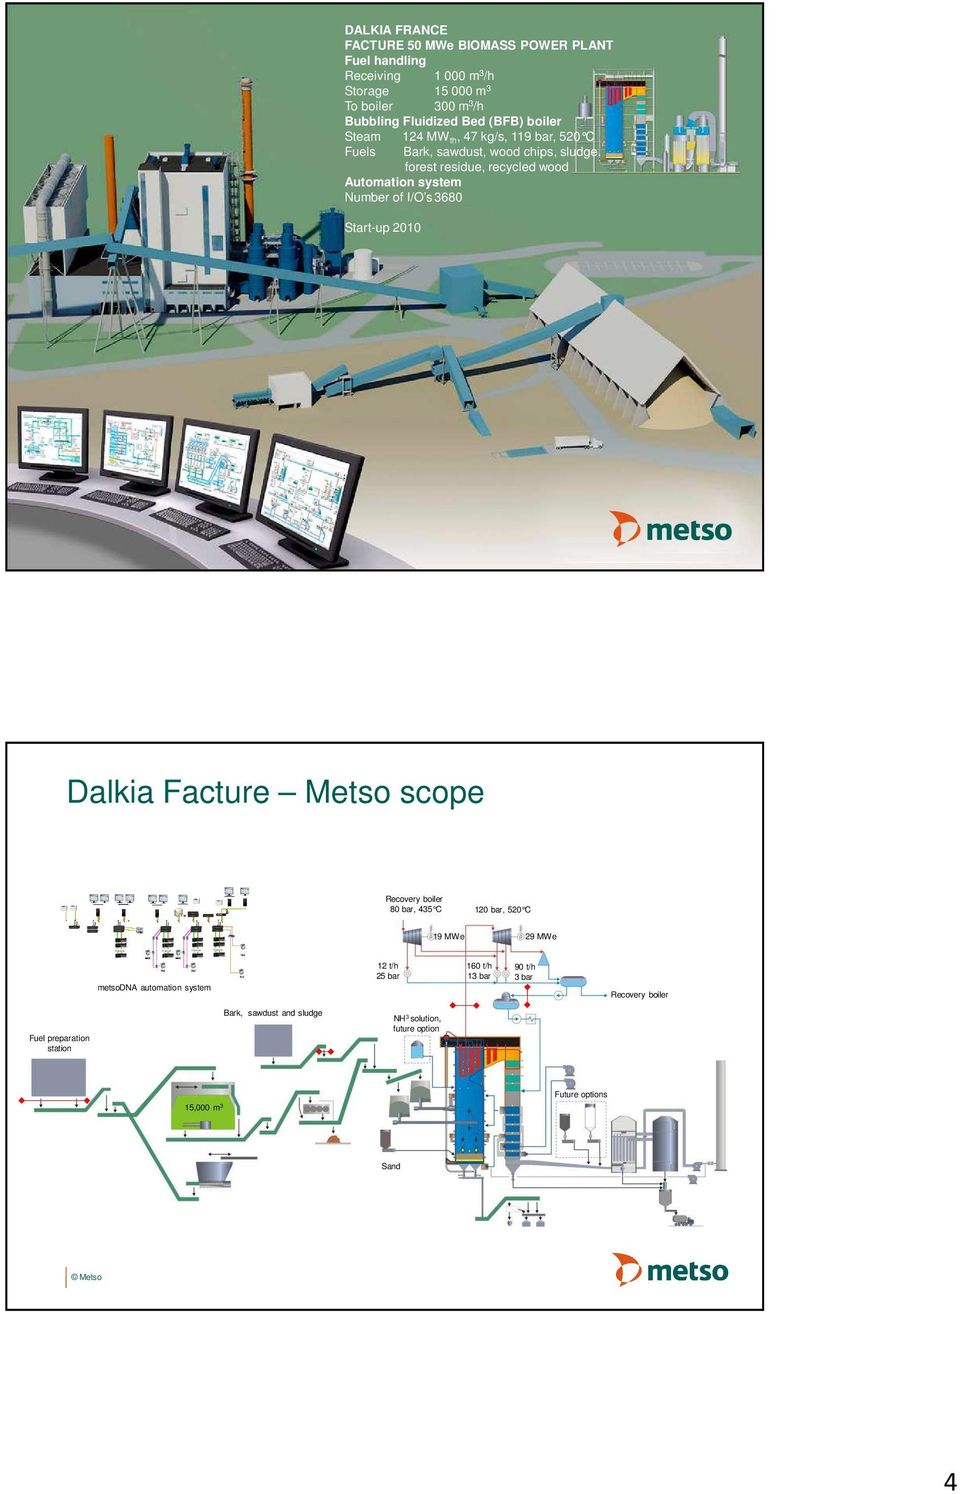 system Number of I/O s3680 Start-up 2010 Dalkia Facture Metso scope Recovery boiler 80 bar, 435 C 120 bar, 520 C 19 MWe 29 MWe metsodna automation system 12